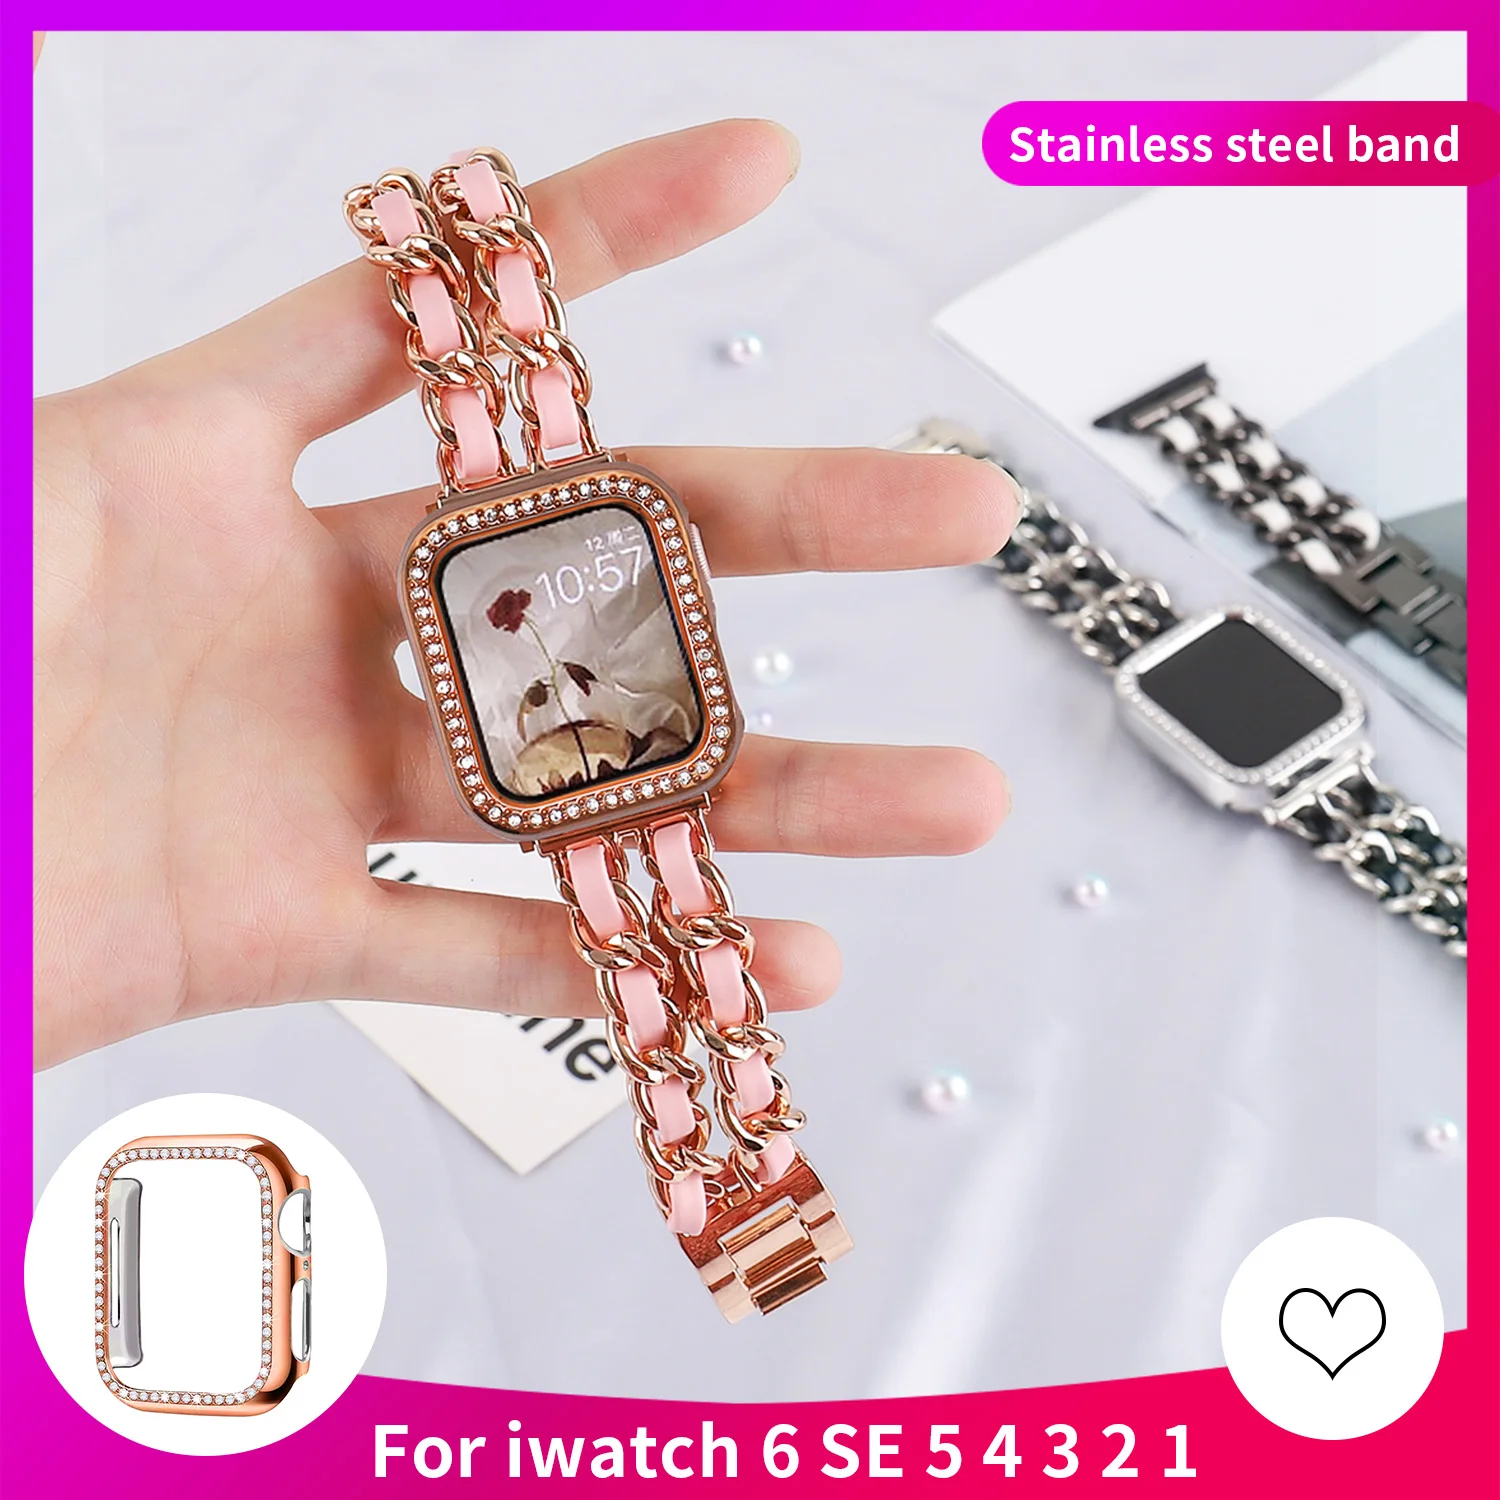 

Stainless Steel Leather Bracelet+Diamond Case for Apple Watch Series 6 Se 40mm 44mm Watchband Strap on iwatch band 432 38mm 42mm